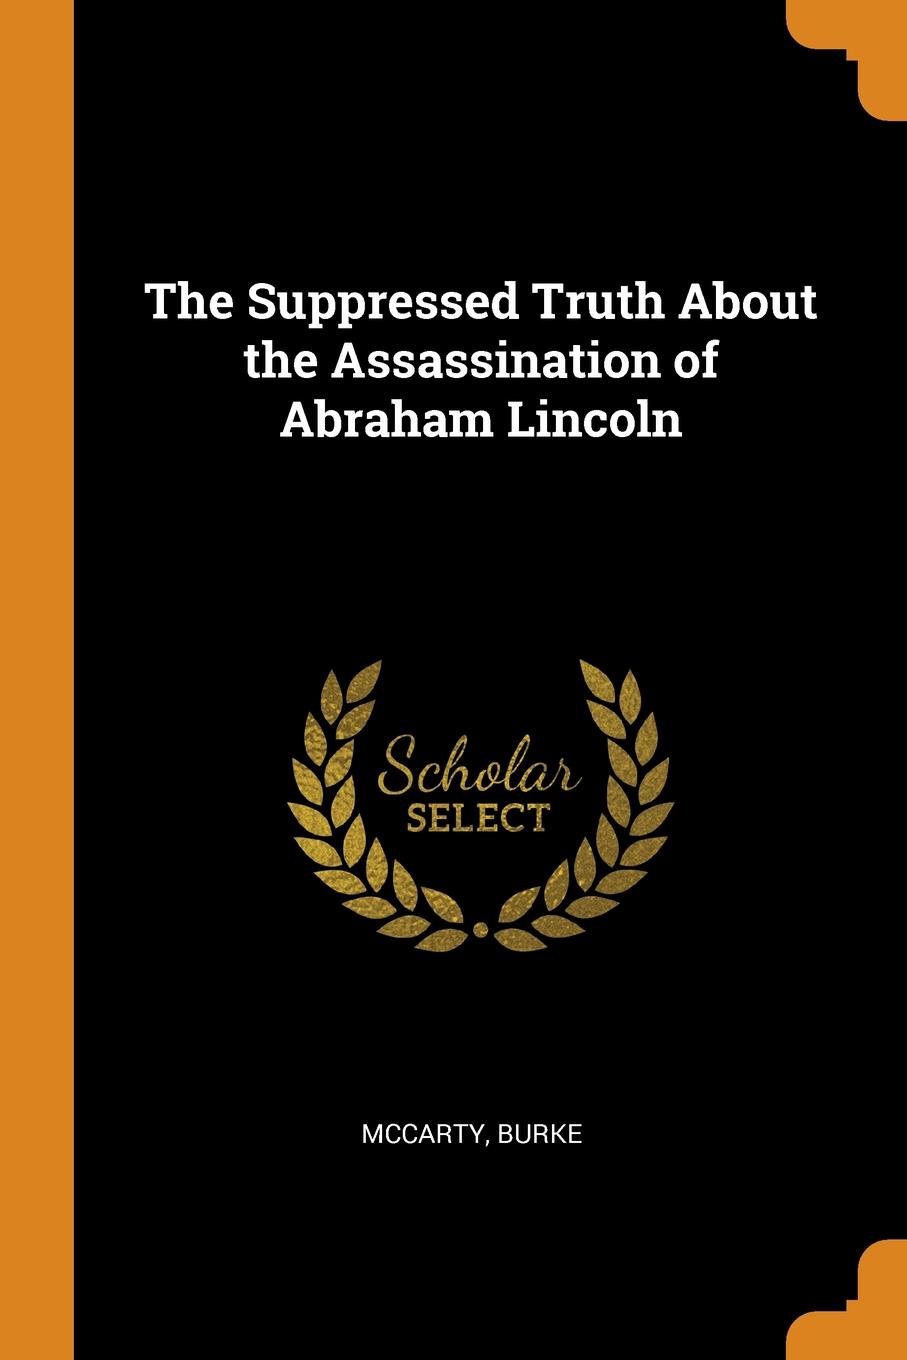 The Suppressed Truth About the Assassination of Abraham Lincoln